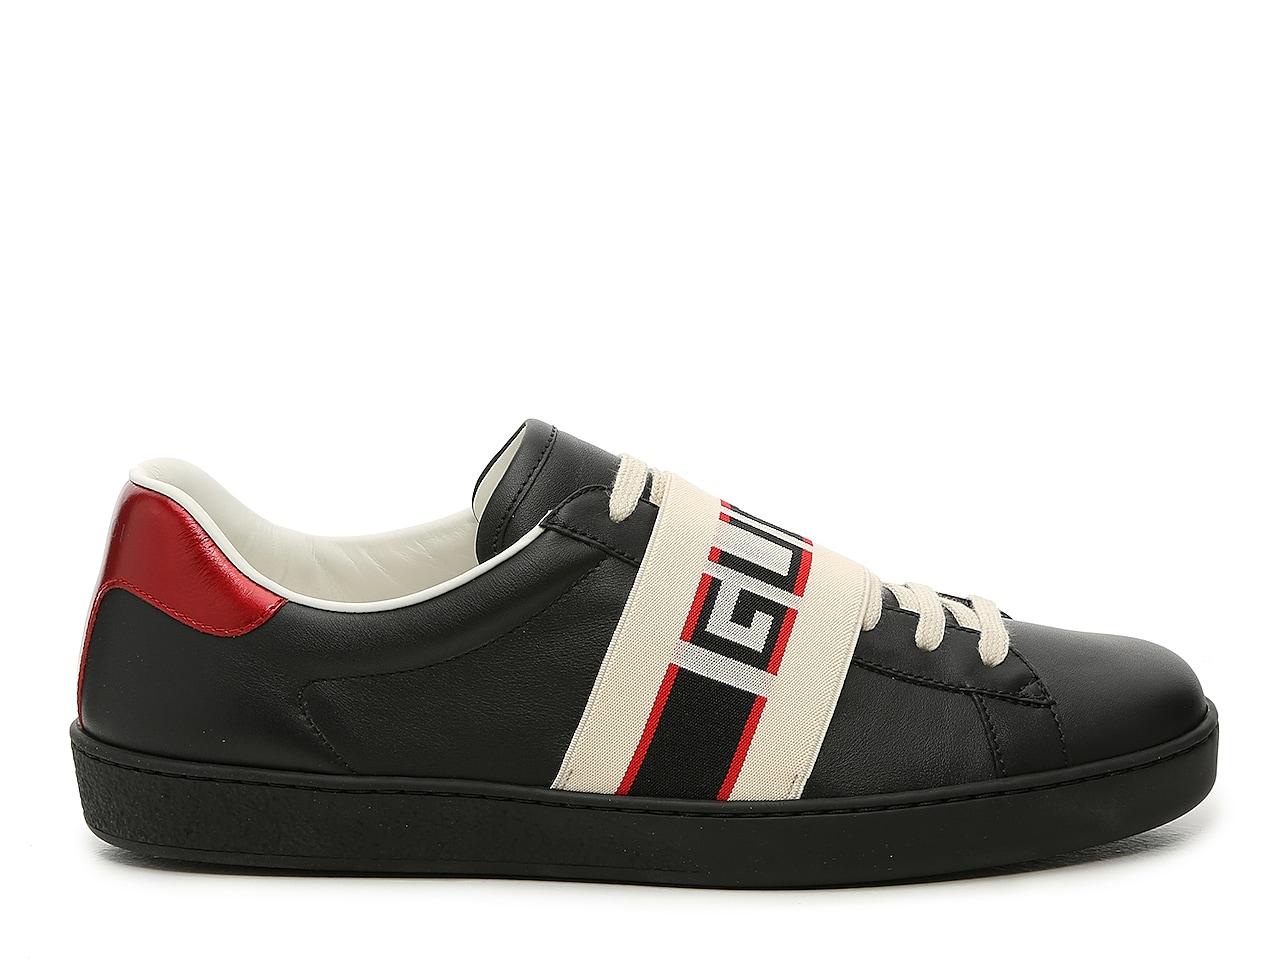 Gucci Rubber New Ace Sneaker in Black/Cream/Red (Black) for Men - Lyst